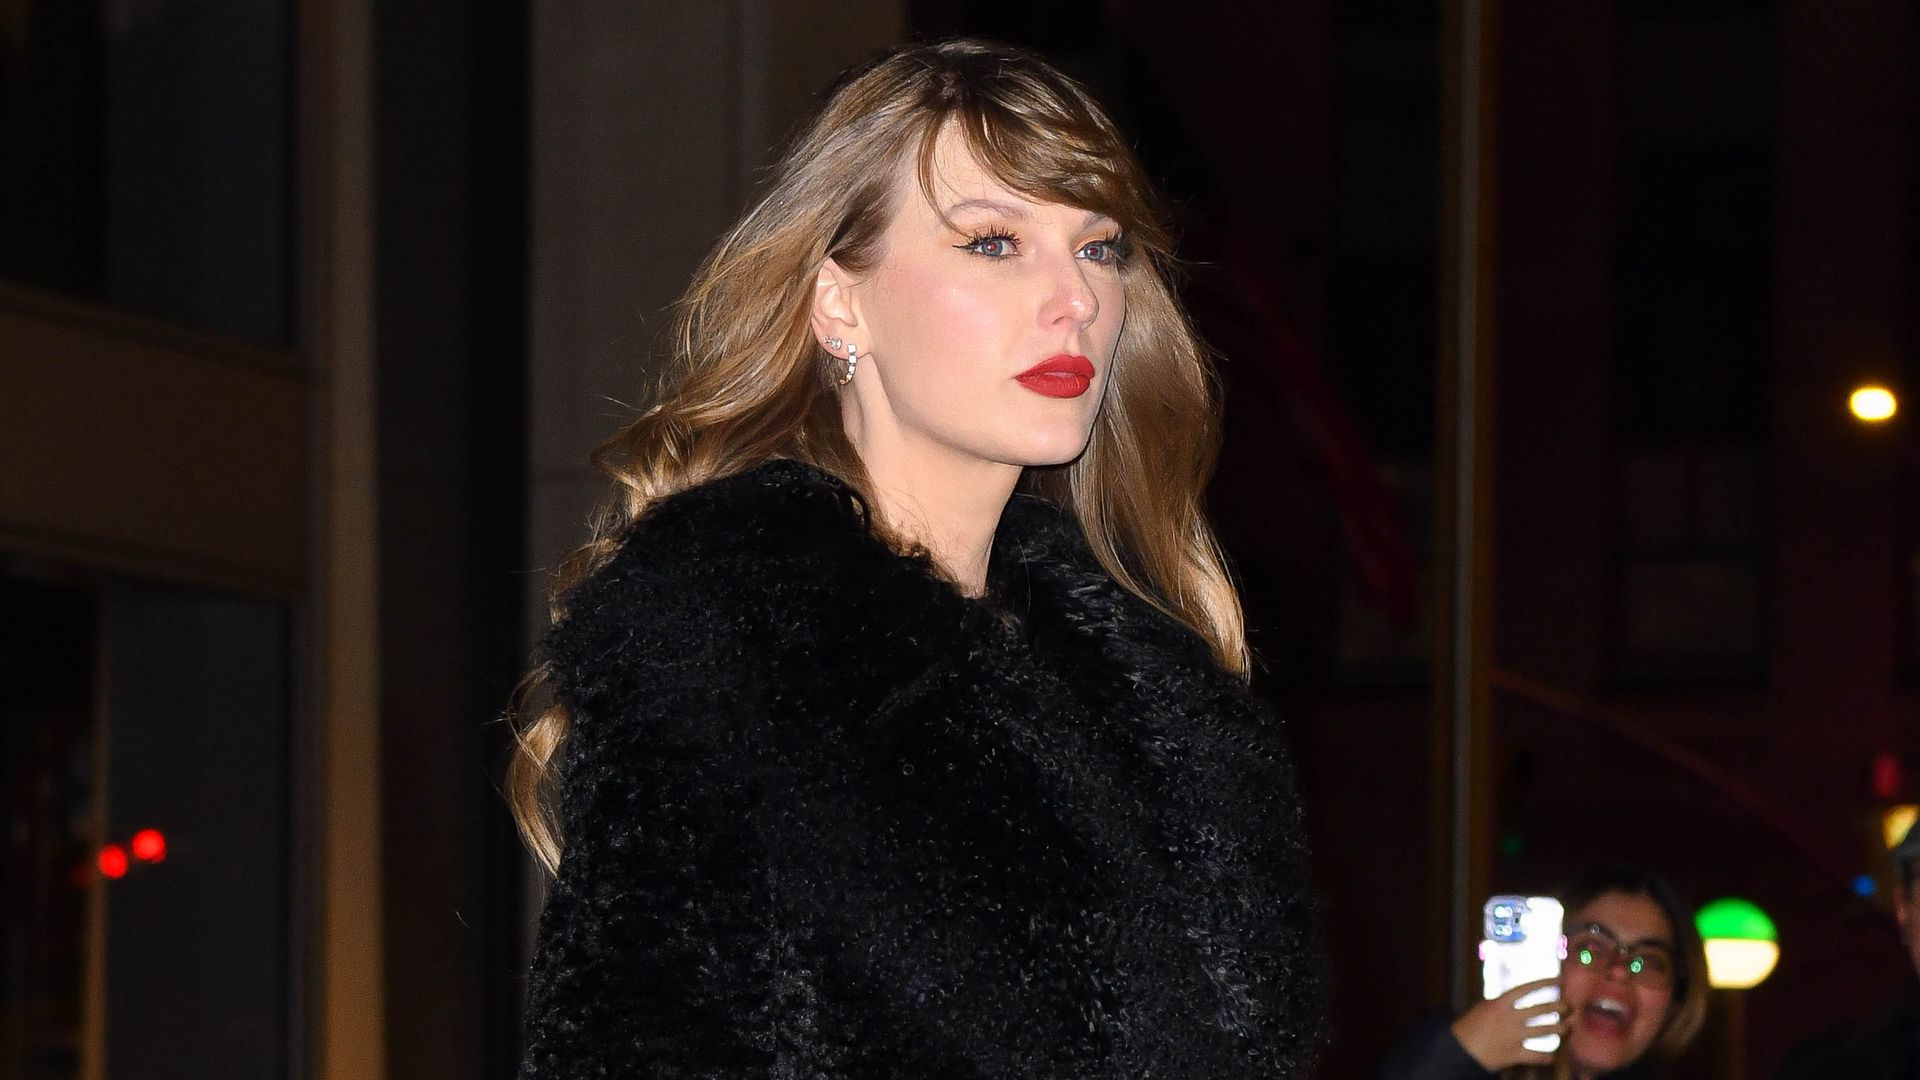 NEW YORK, NEW YORK - DECEMBER 06: Taylor Swift leaves the "Poor Things" premiere after party at Avra Rockefeller Center on December 06, 2023 in New York City. (Photo by James Devaney/GC Images)